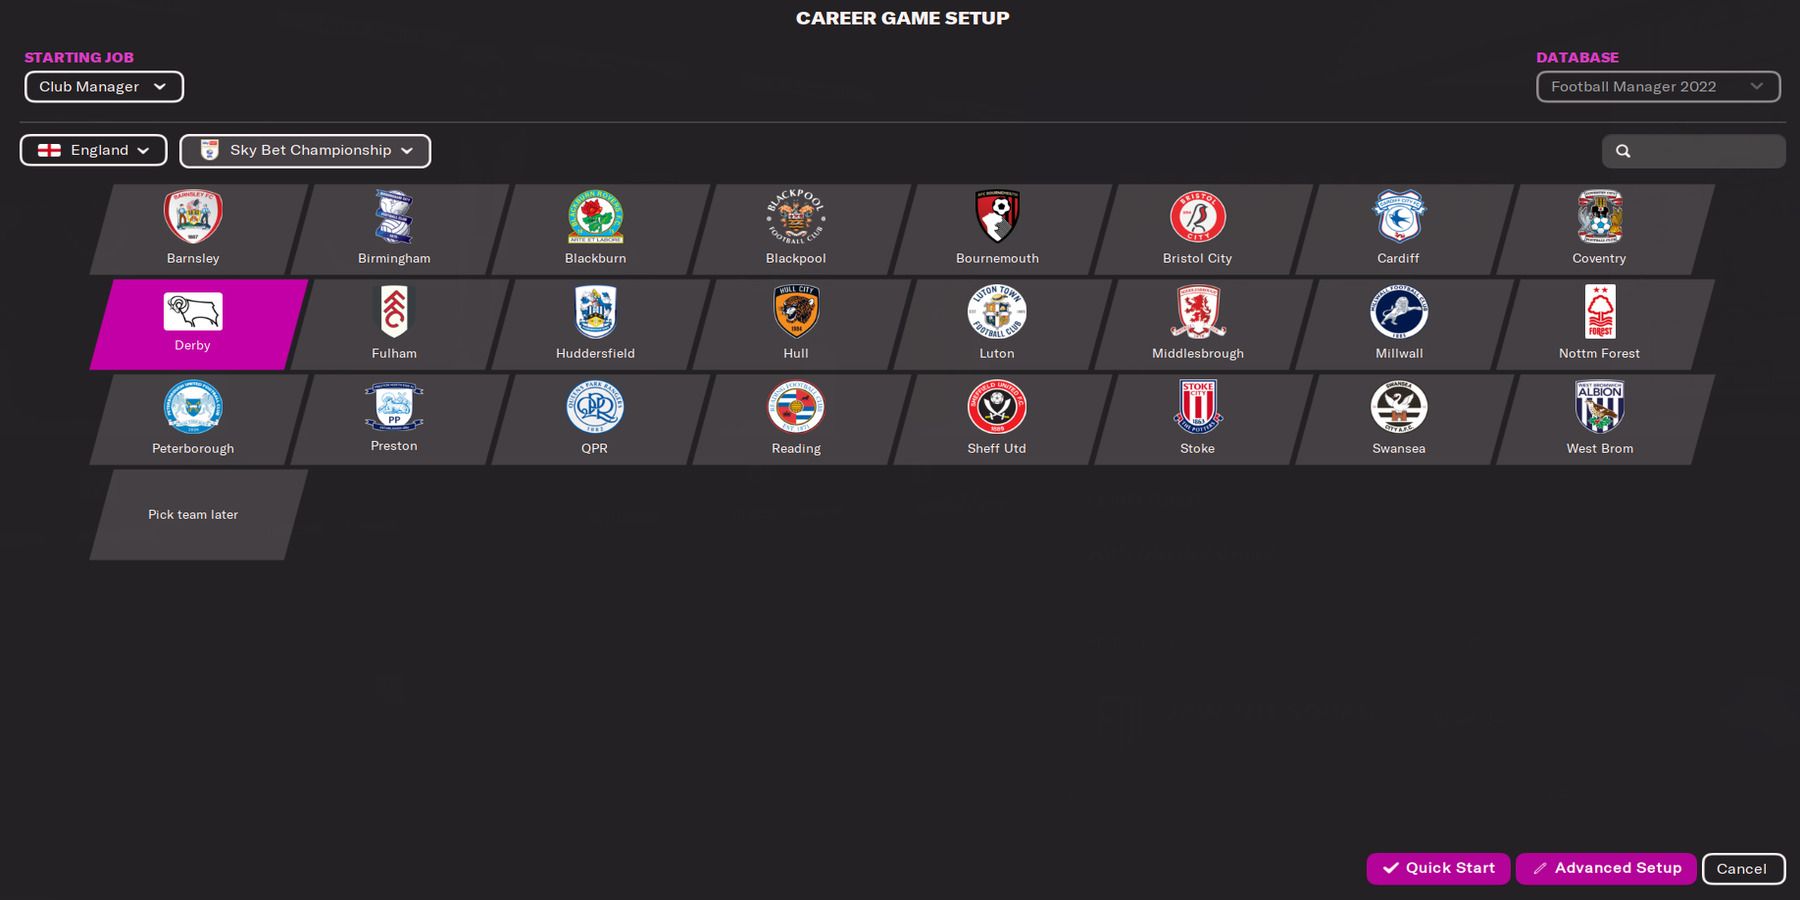 Career Game Setup with Derby County highlighted